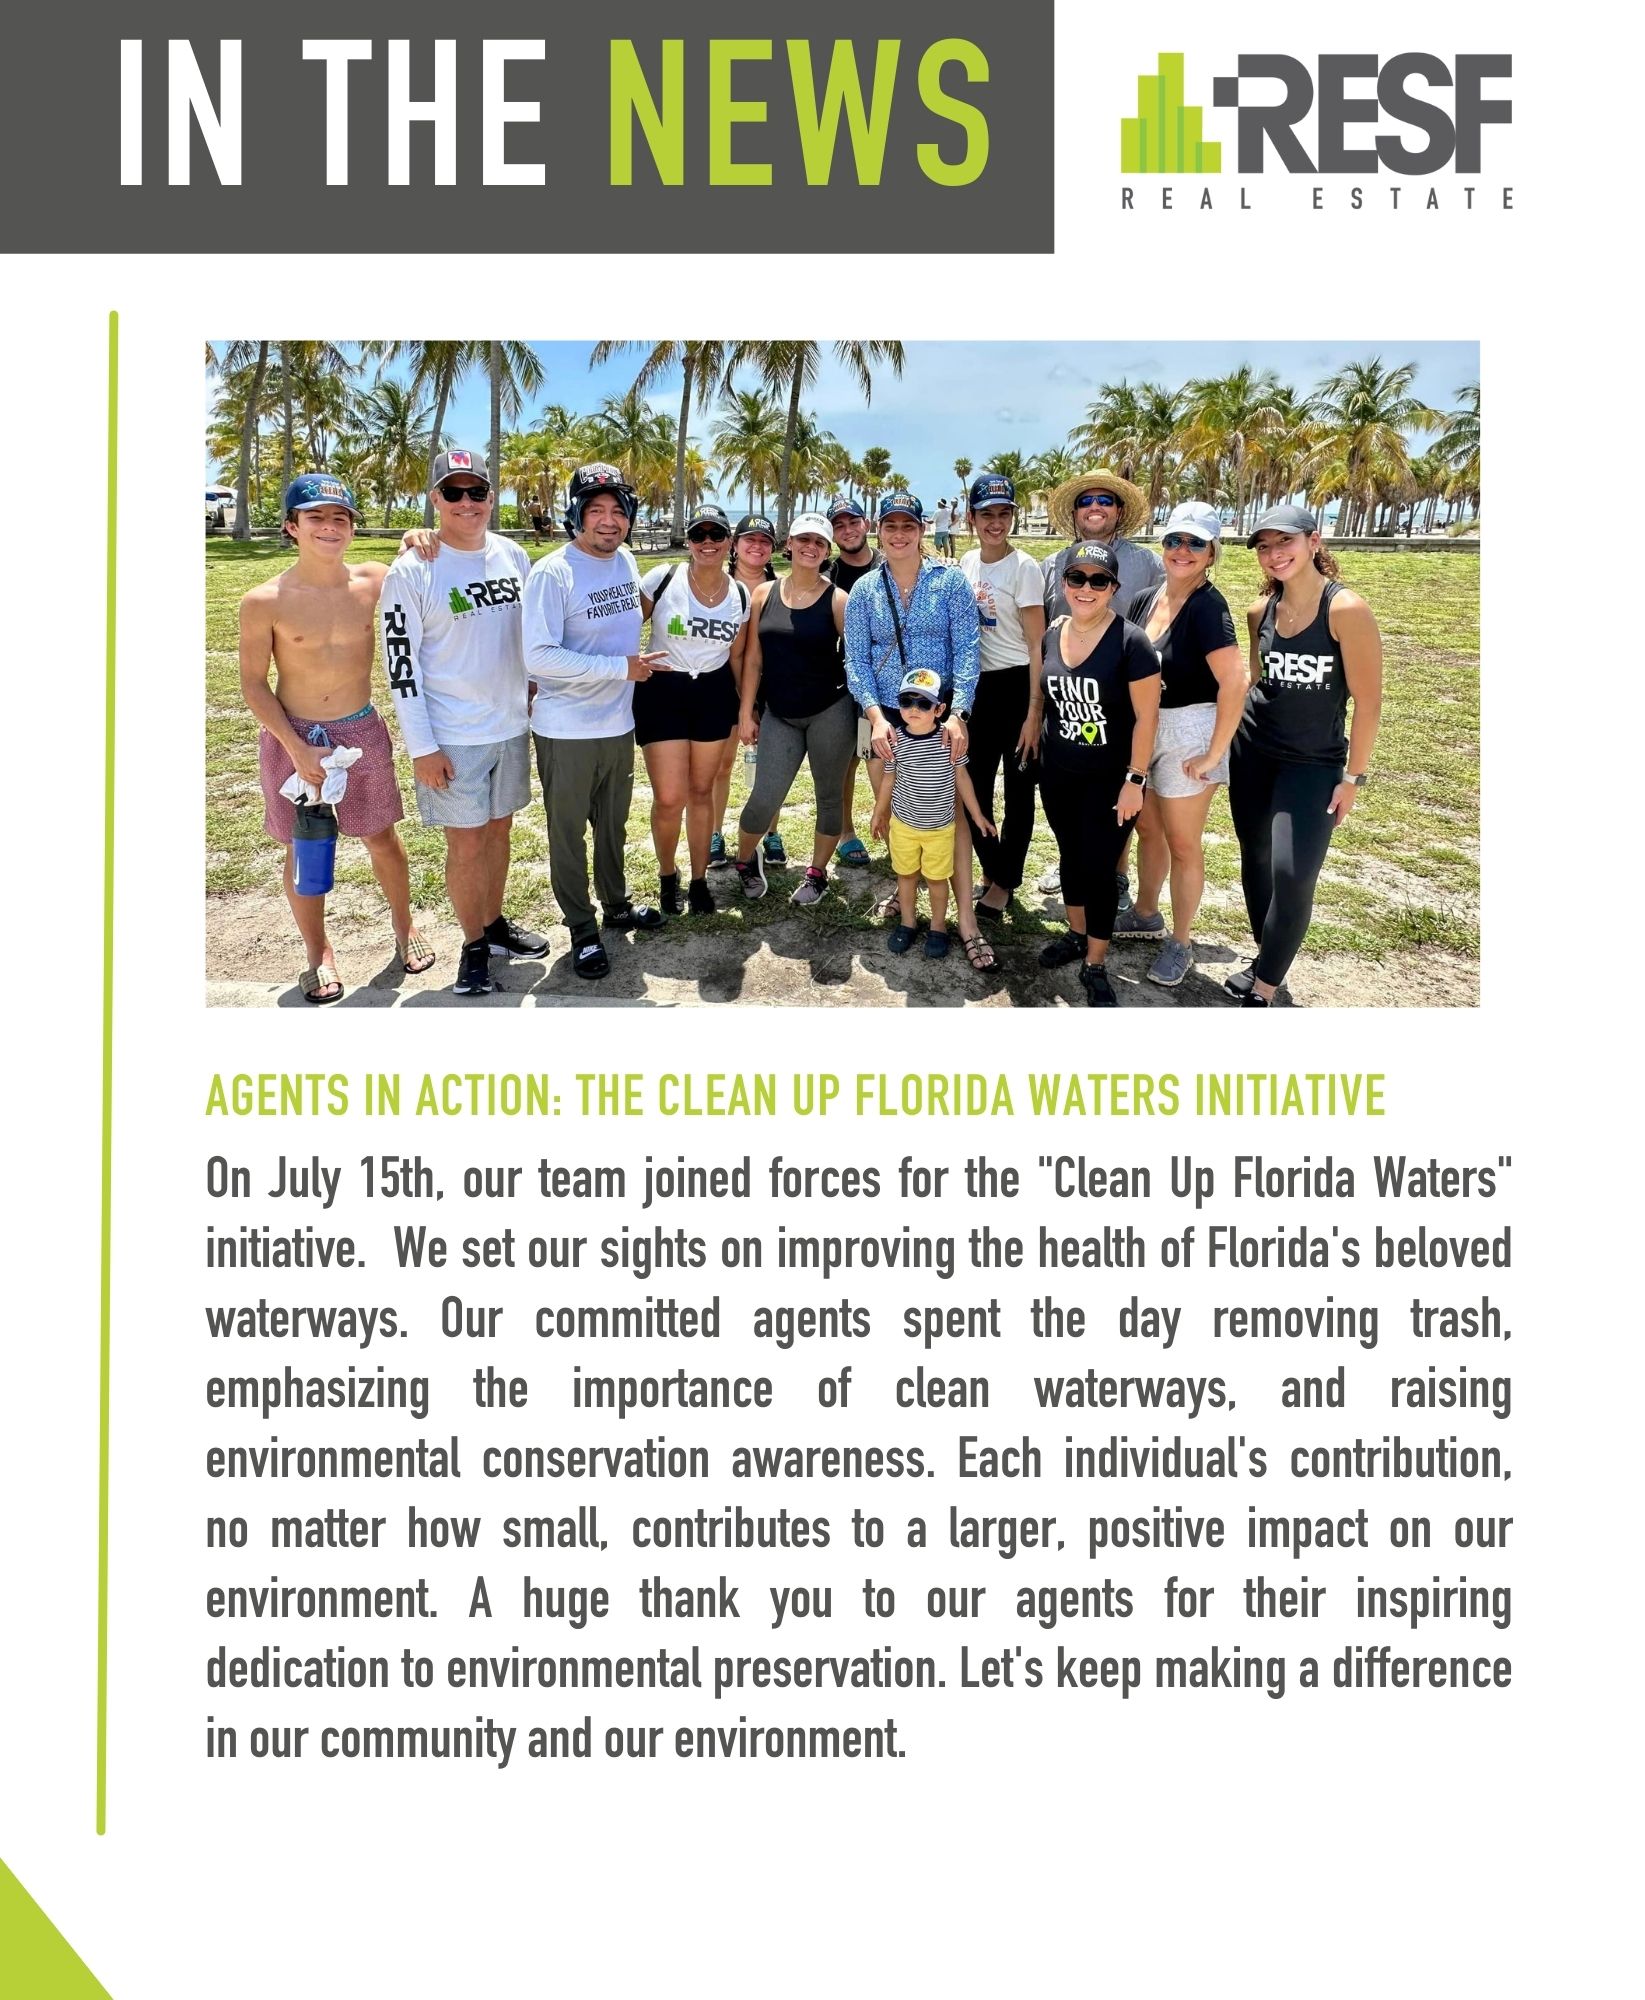 Agents in Action: The Clean Up Florida Waters Initiative